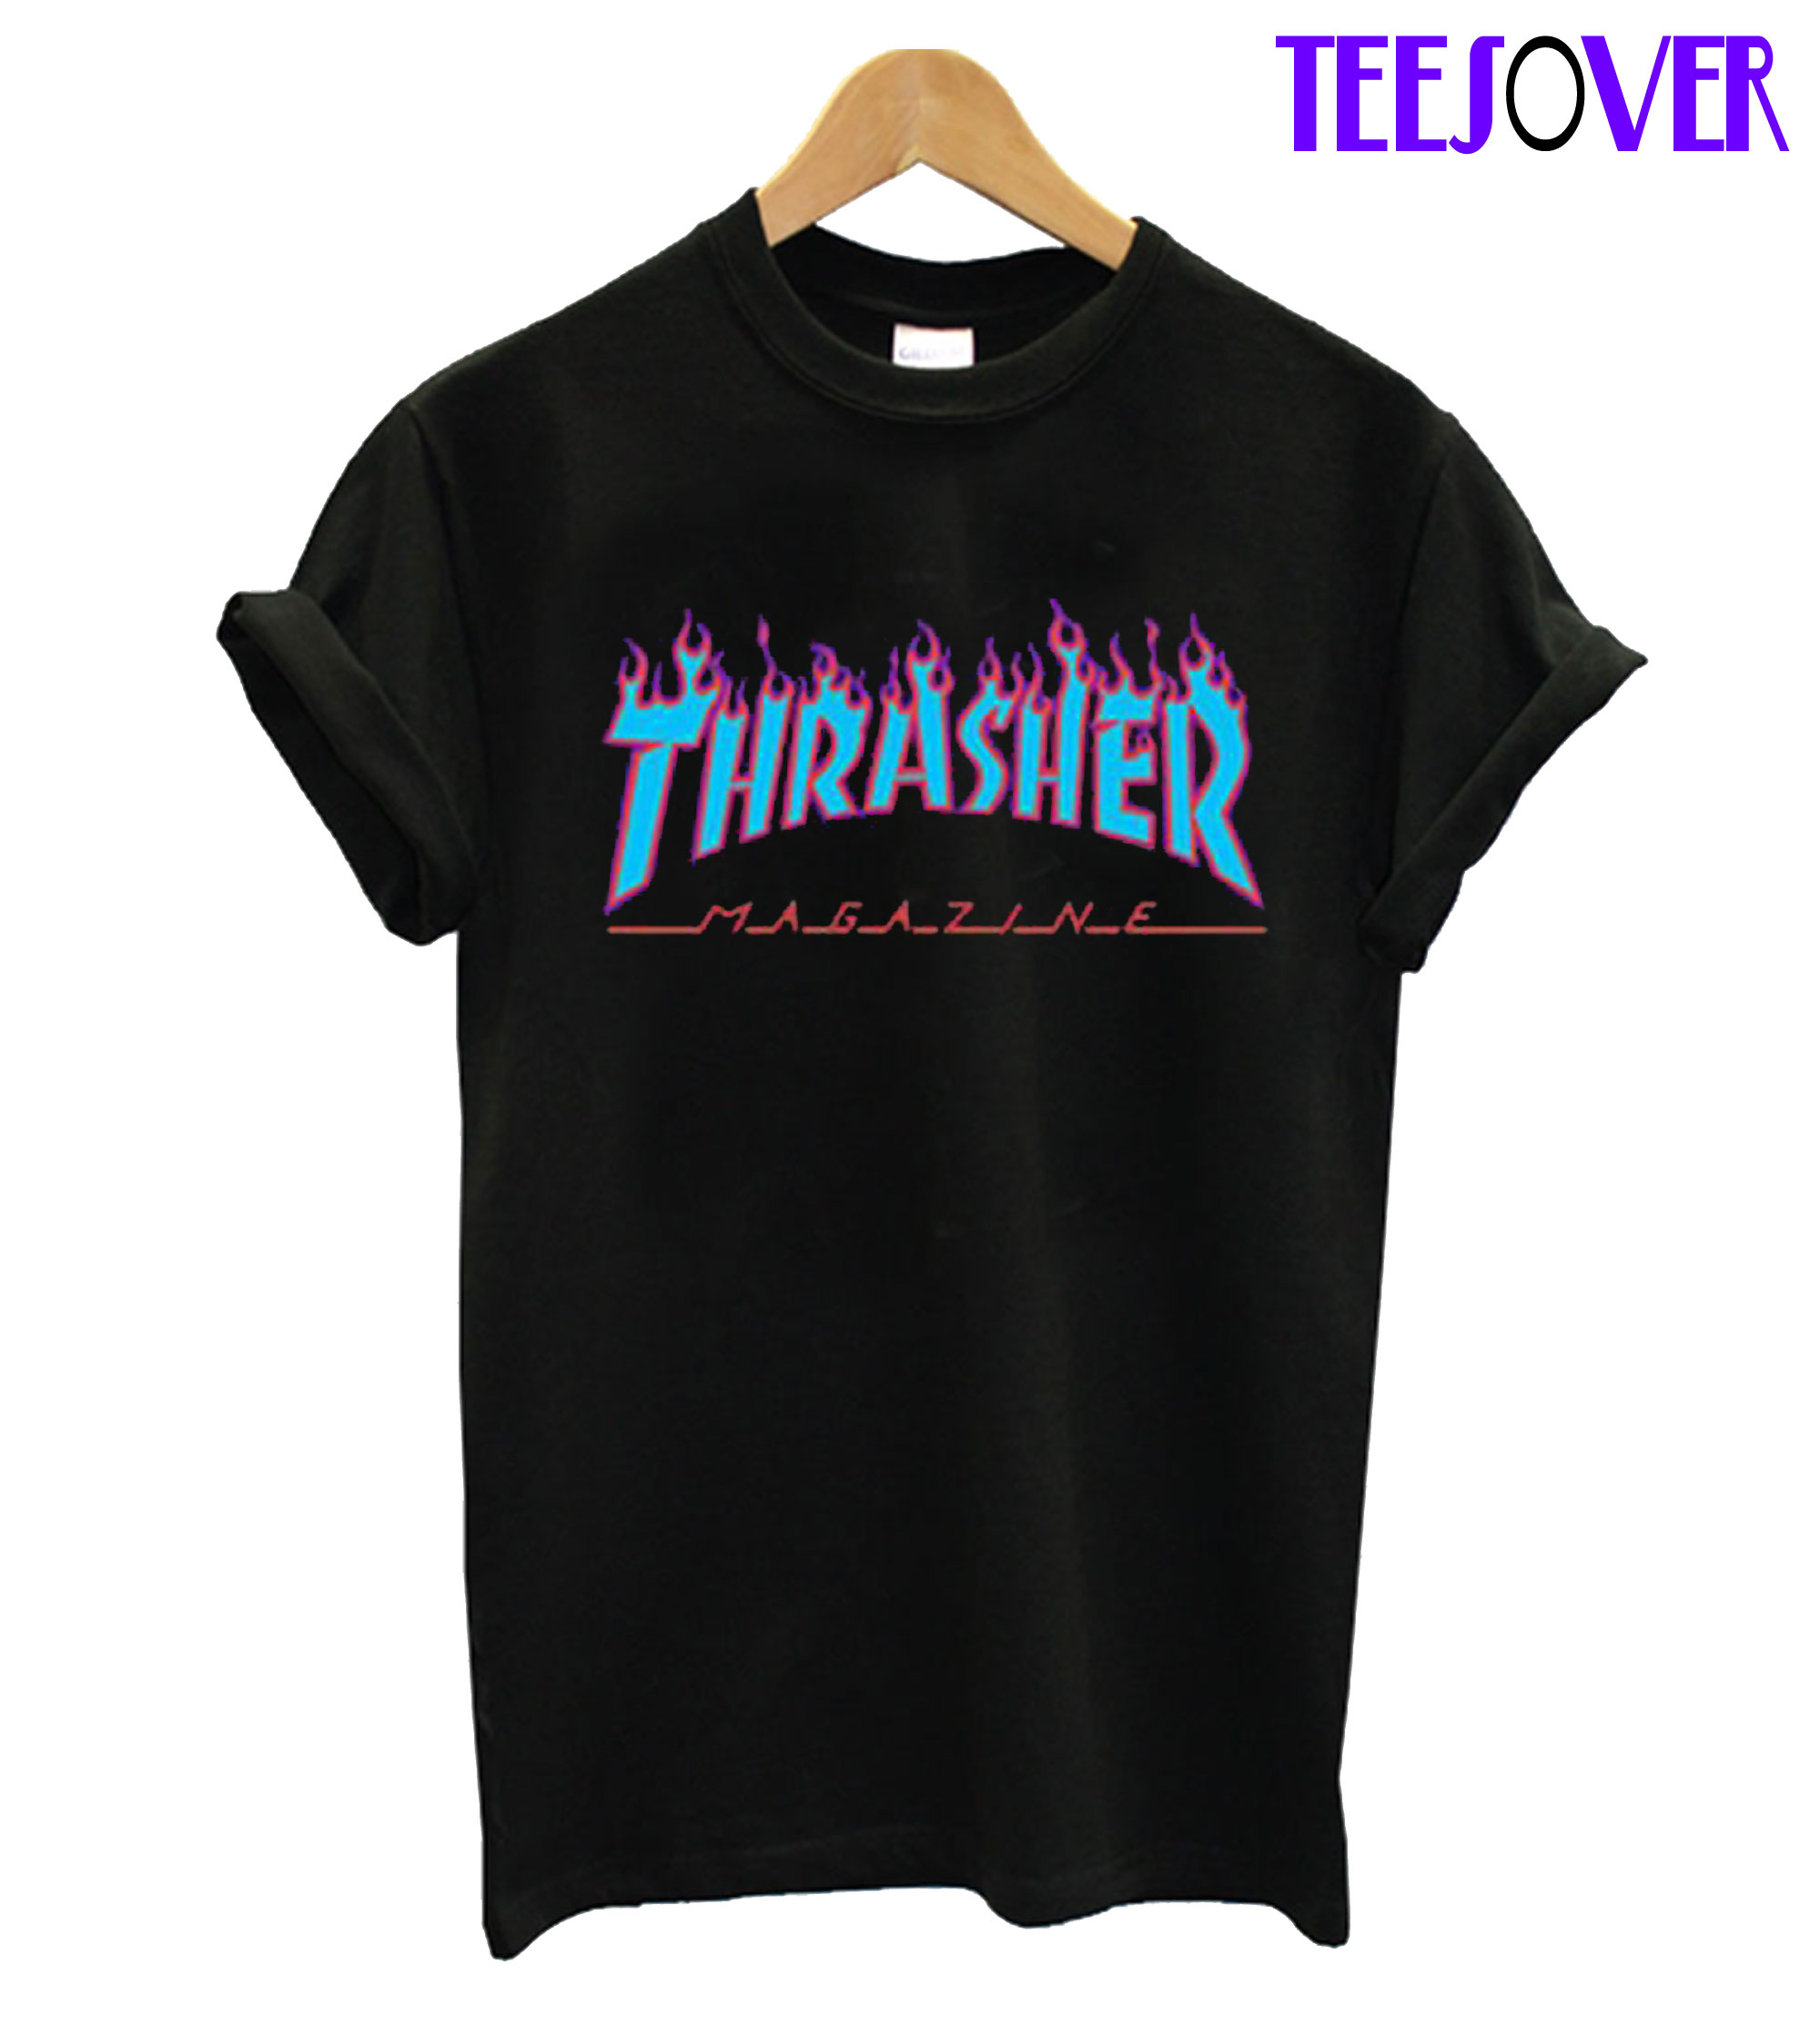 red and black thrasher shirt